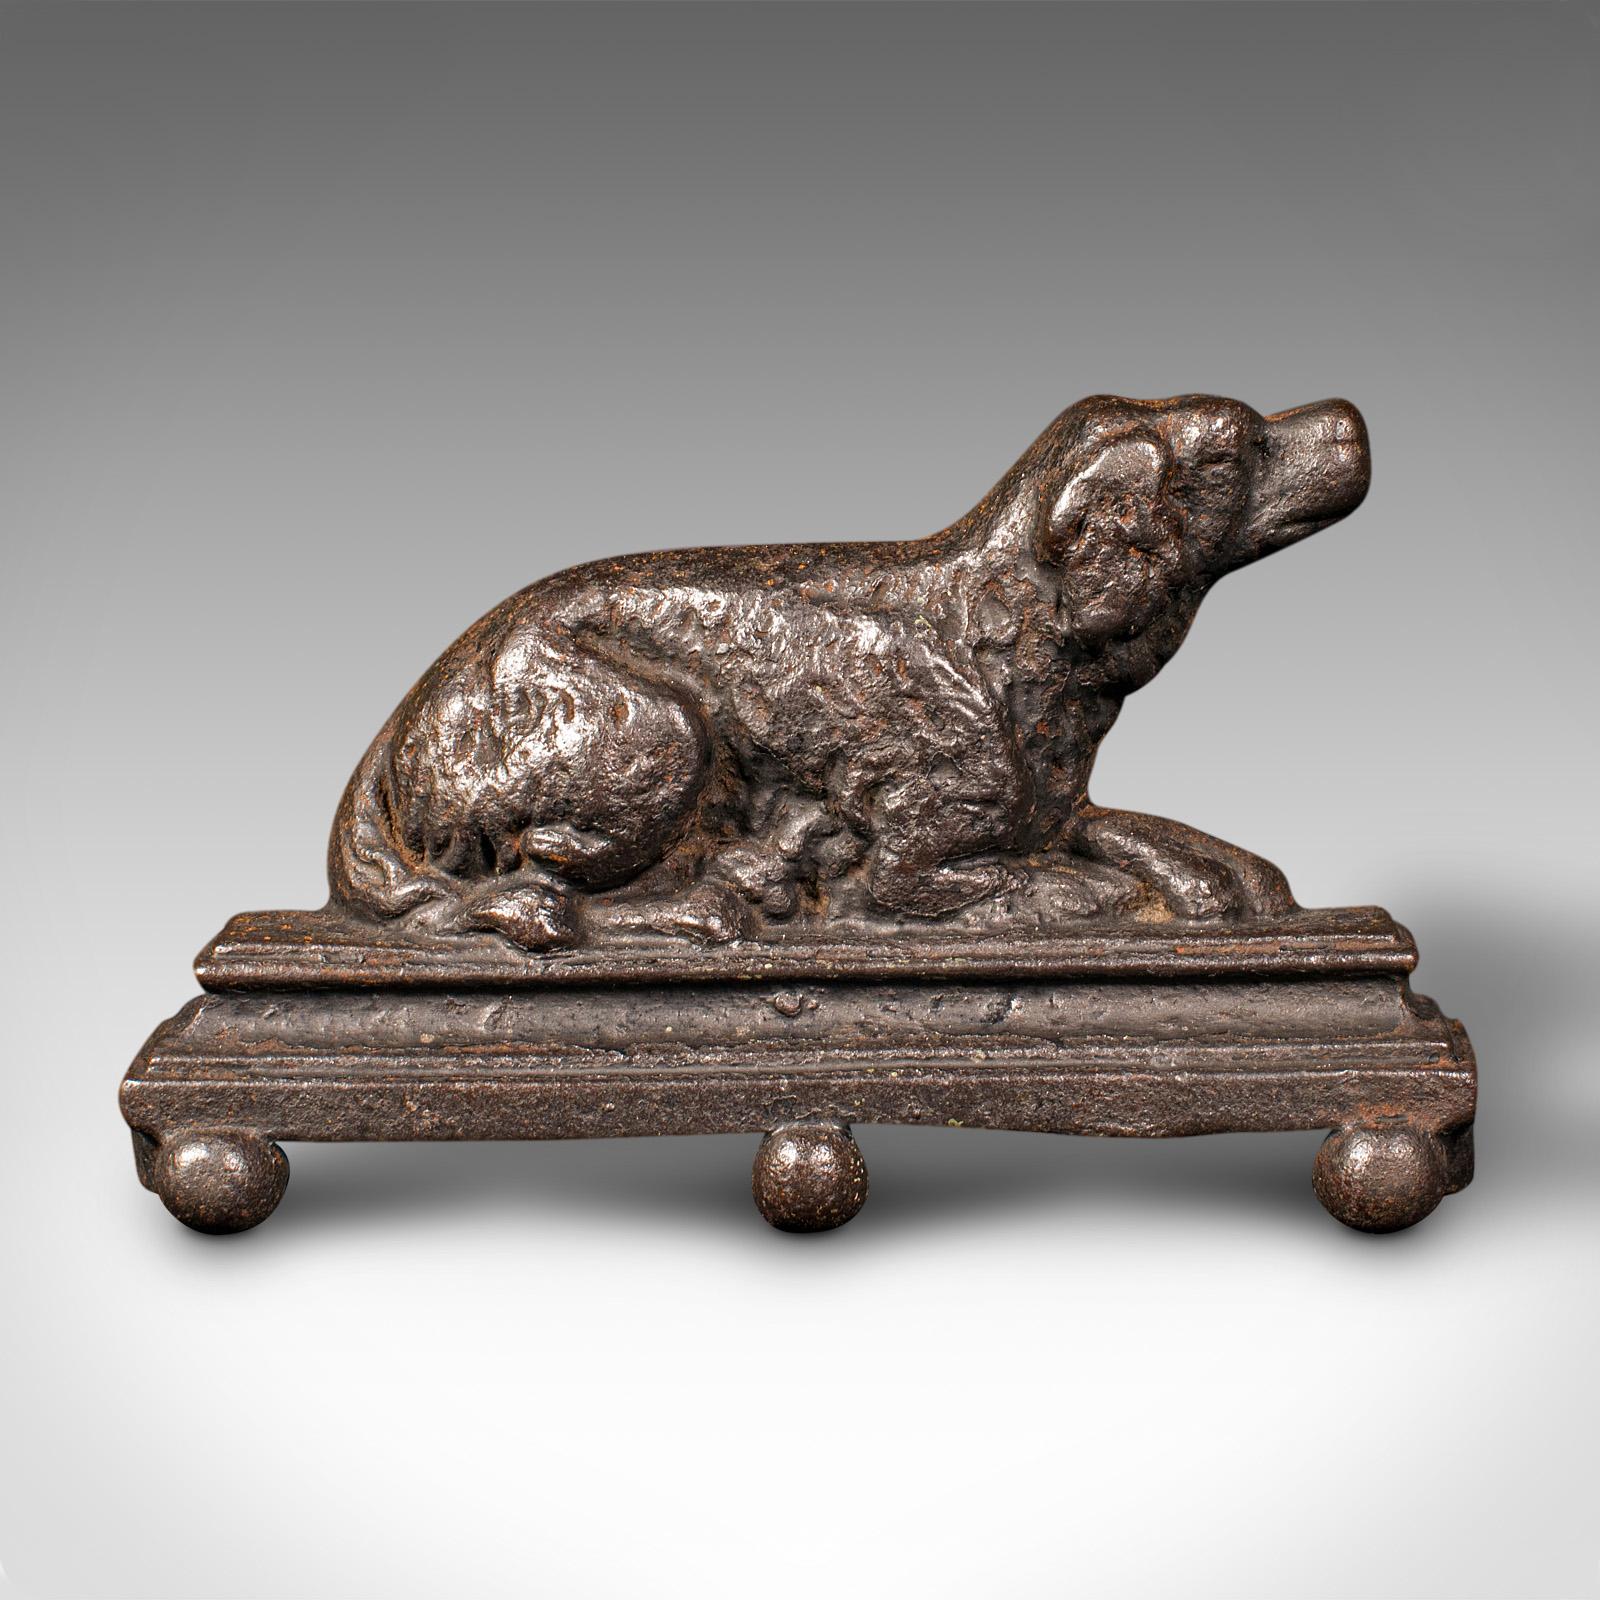 This is a small antique dog door stop. An English, cast iron decorative doorstopper in Retriever form, dating to the late Victorian period, circa 1900.

Charming door stop ideal for the dog lover
Displaying a desirable aged patina and in good